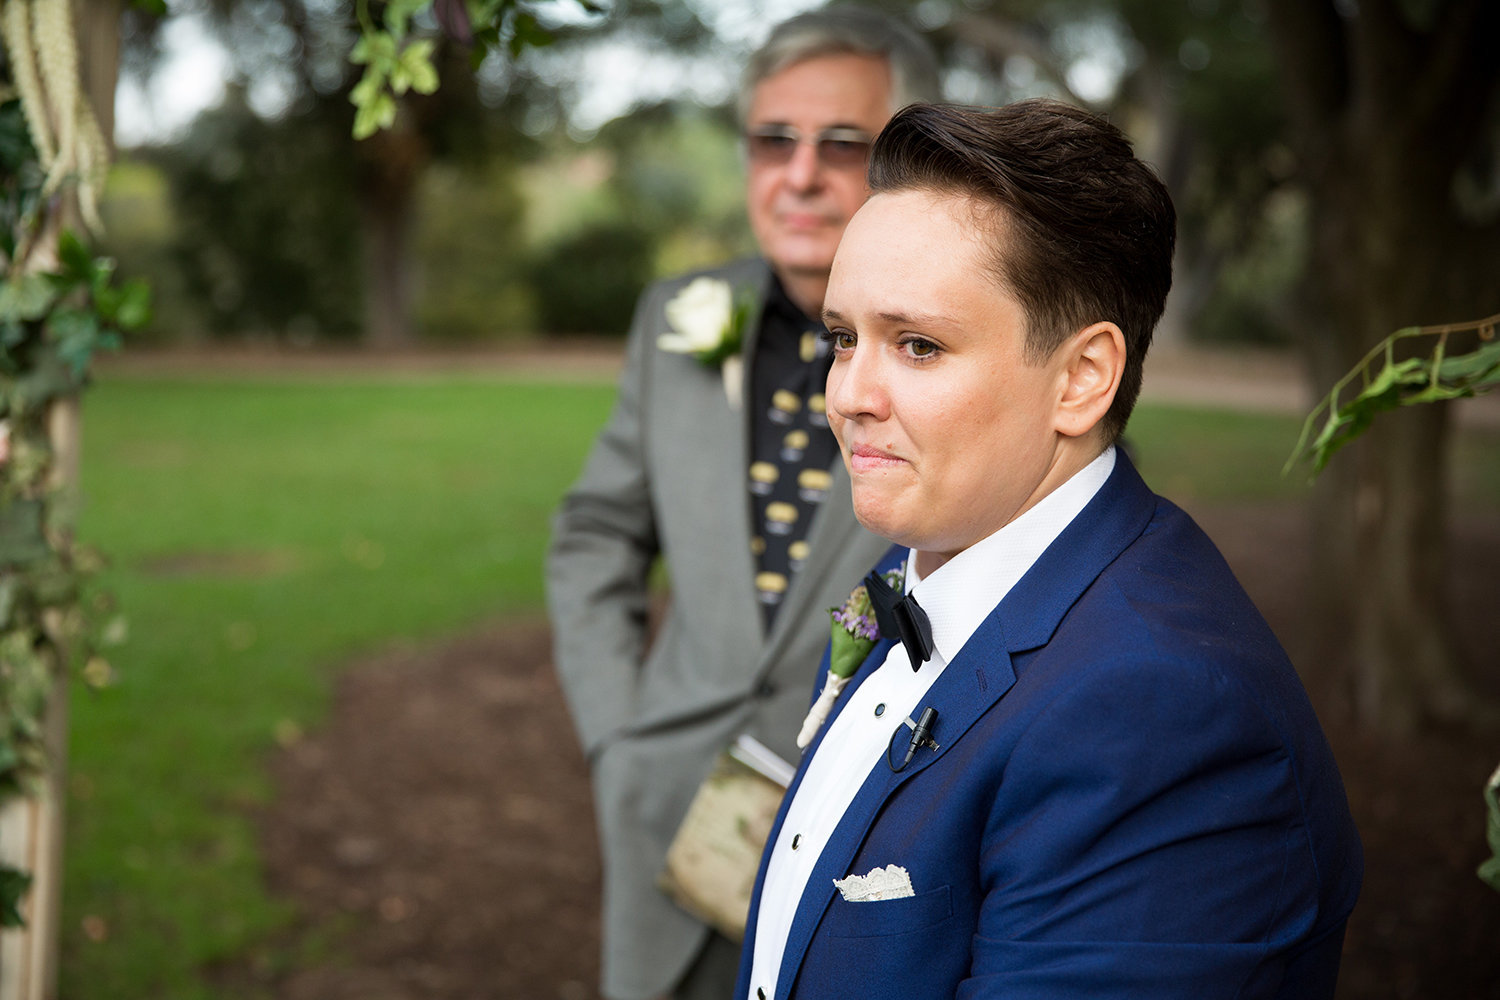 Can't help but react when you see your bride coming down the aisle | LGBT wedding ceremony